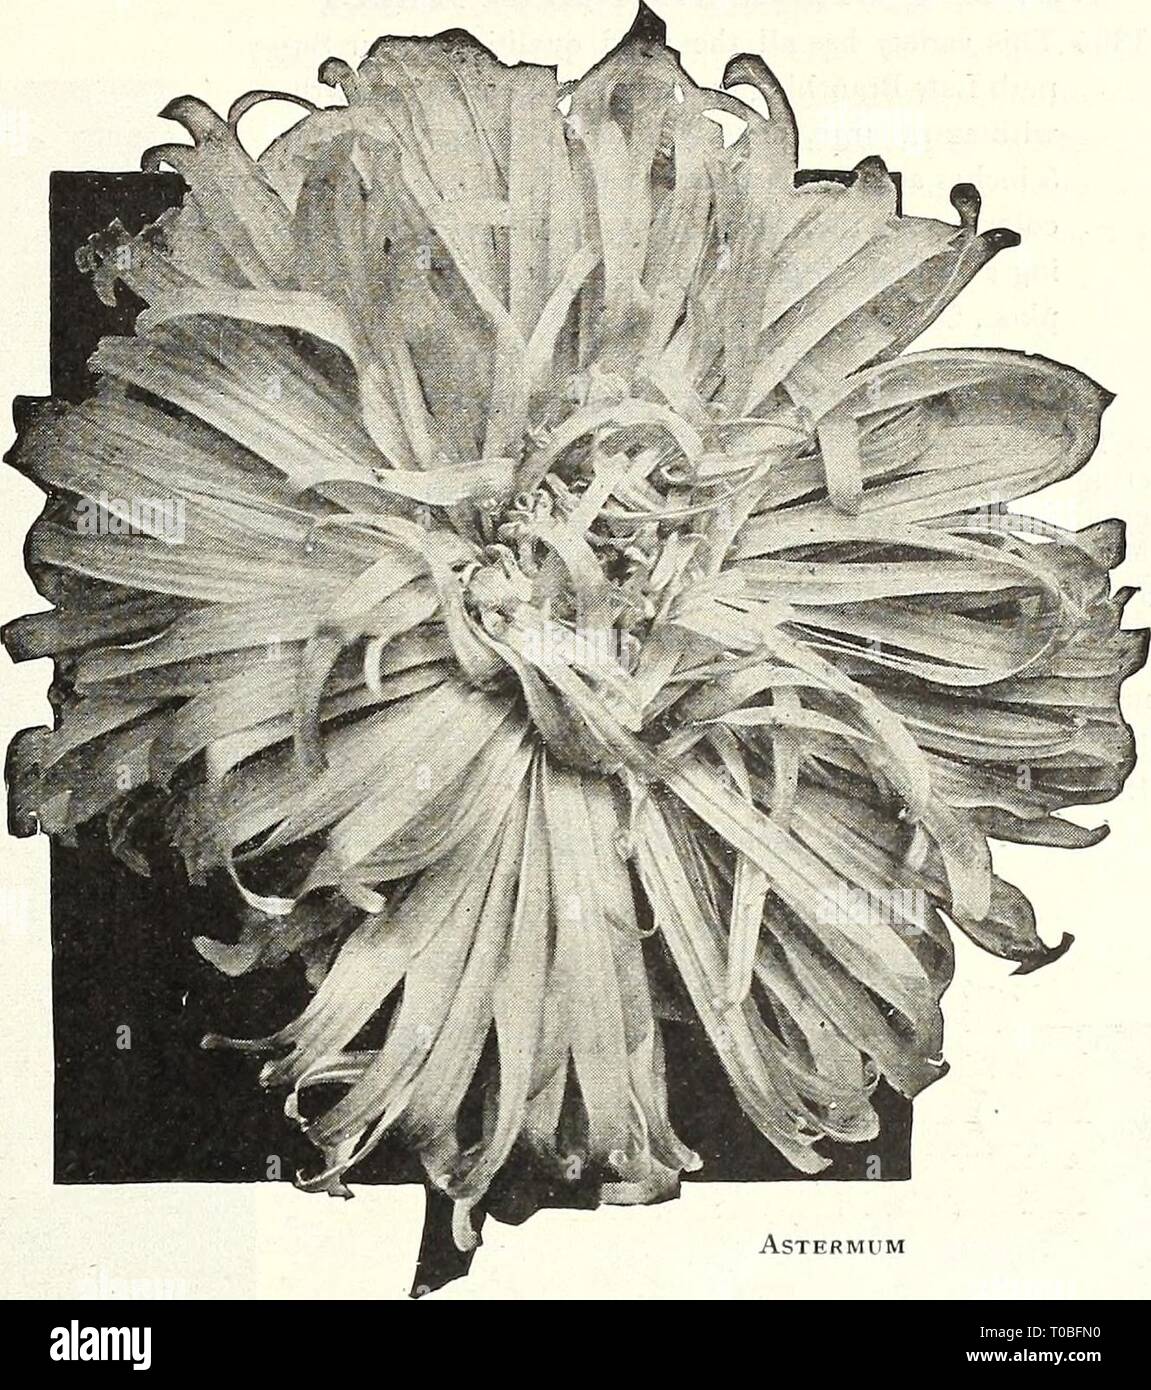 Dreer's garden book 1922 (1922) Dreer's garden book 1922 dreersgardenbook1922henr Year: 1922  /flEigyA-iam^ RELIABLE FLOWER SEEDS, &gt;HILMeiPHR 67 Dreer's Famous American Asters Asters are one of the most important summer and autumn flowers, and receive special care at our hands. Yearly exhaustive tests are made with a view to offer- ing only the choicest kinds, regardless of cost. As a result of this care our list comprises only such sorts as can be planted with perfect confidence that nothing better is procurable, no matter at what price or from what source. The varieties offered on this an Stock Photo